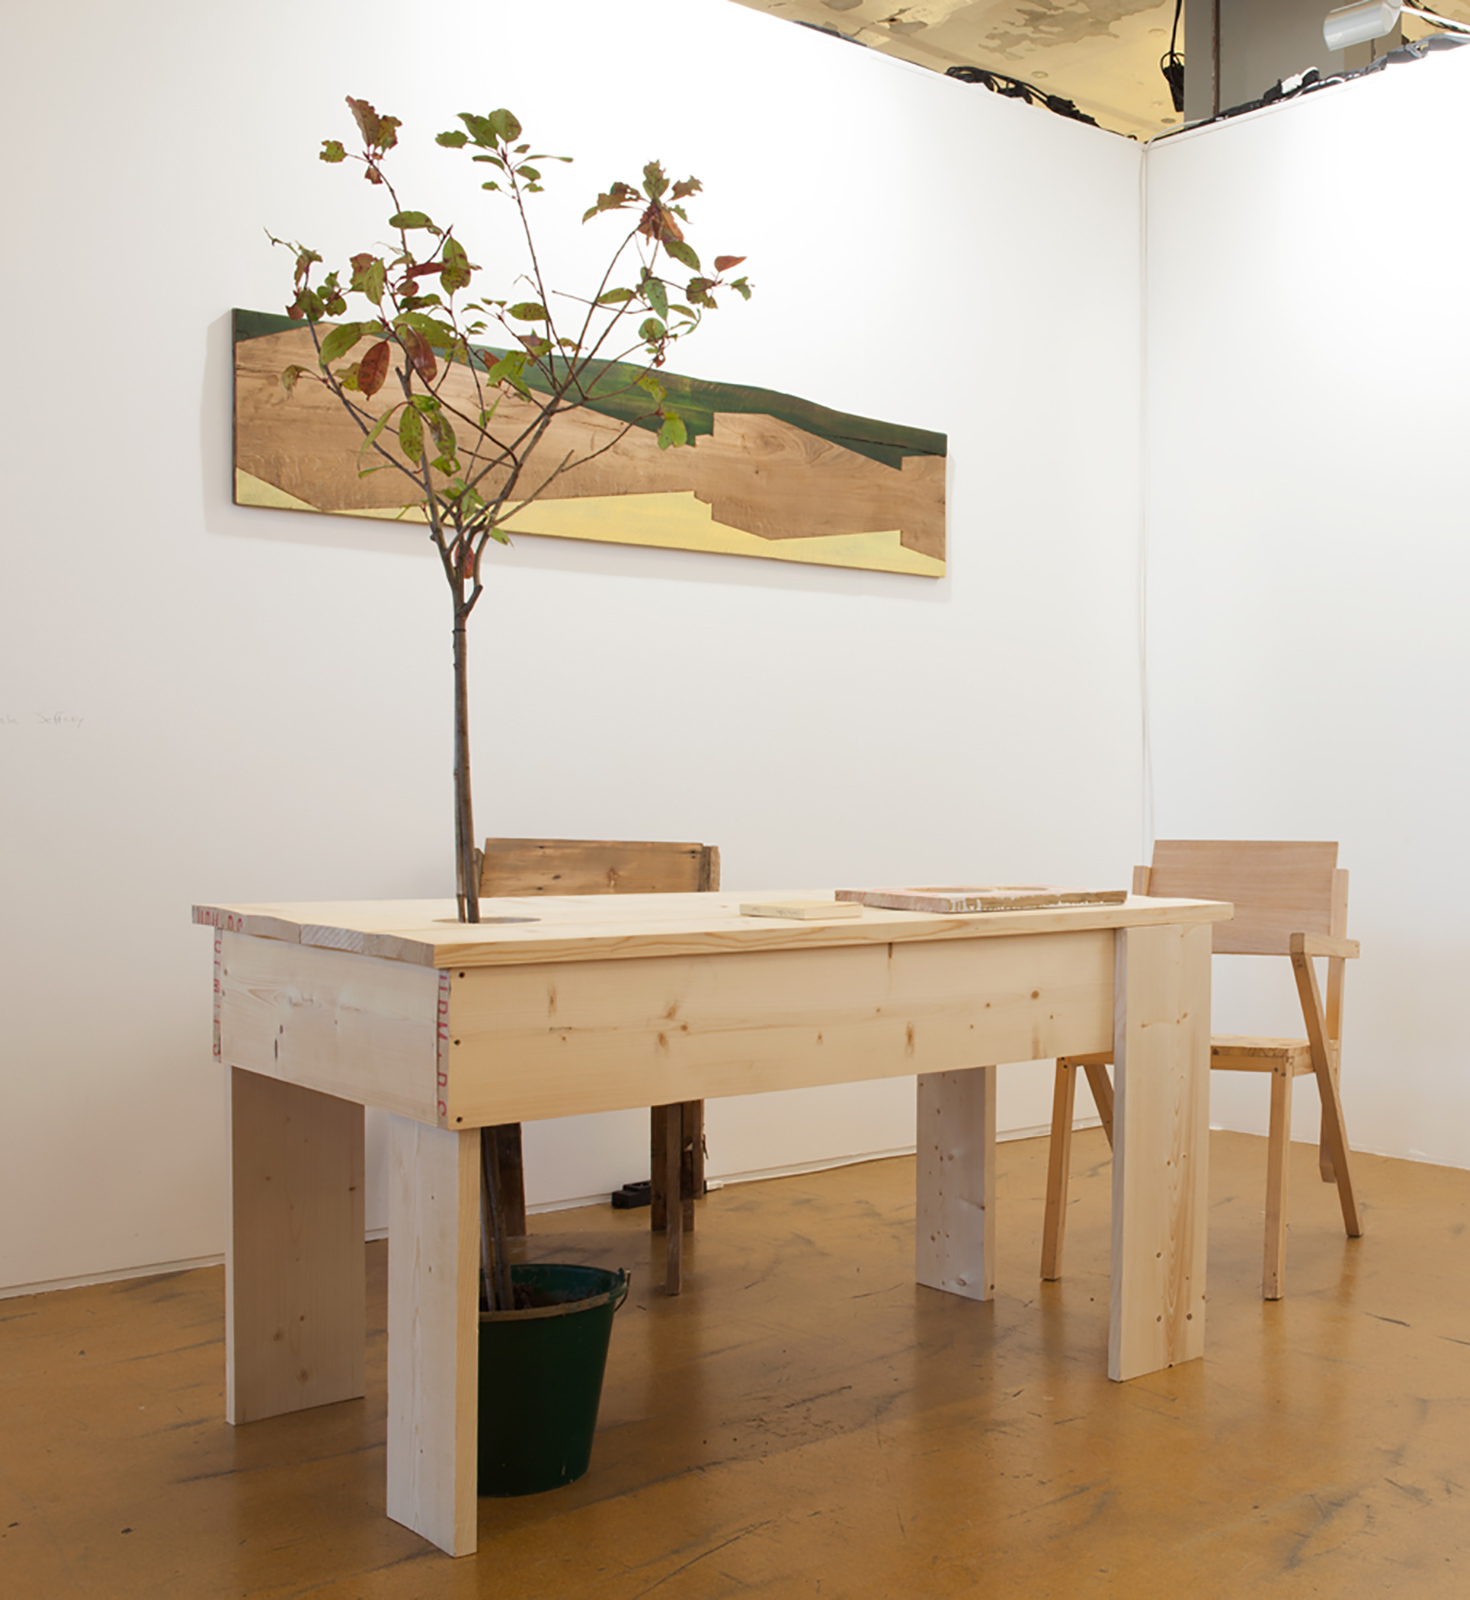 Desk with plant, 2016